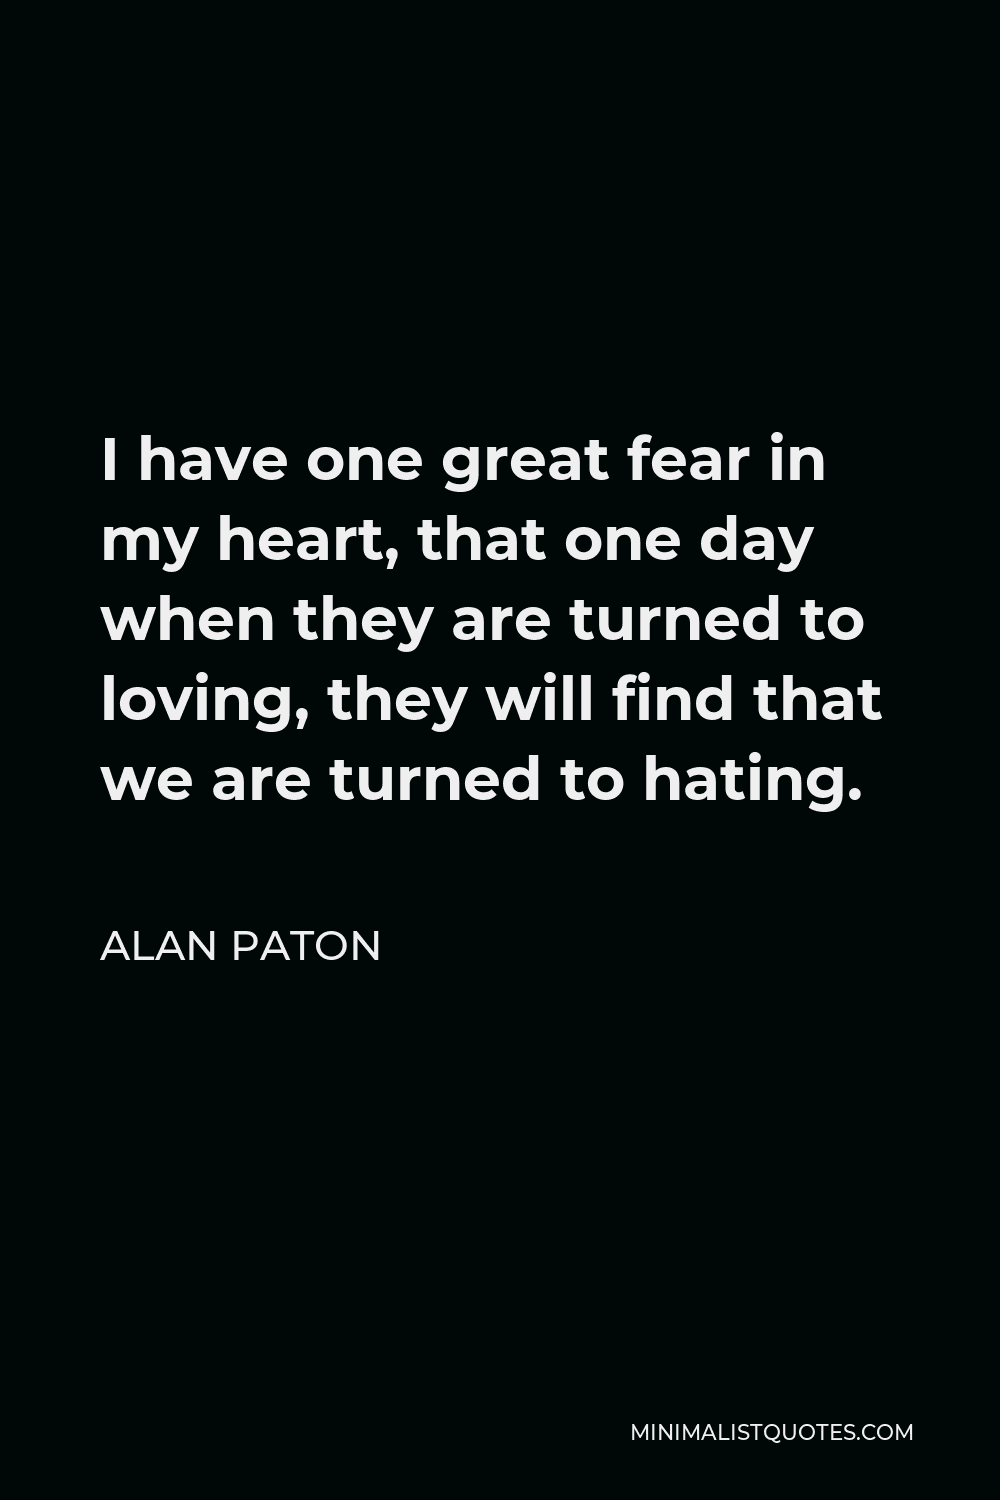 Alan Paton Quote - I have one great fear in my heart, that one day when they are turned to loving, they will find that we are turned to hating.